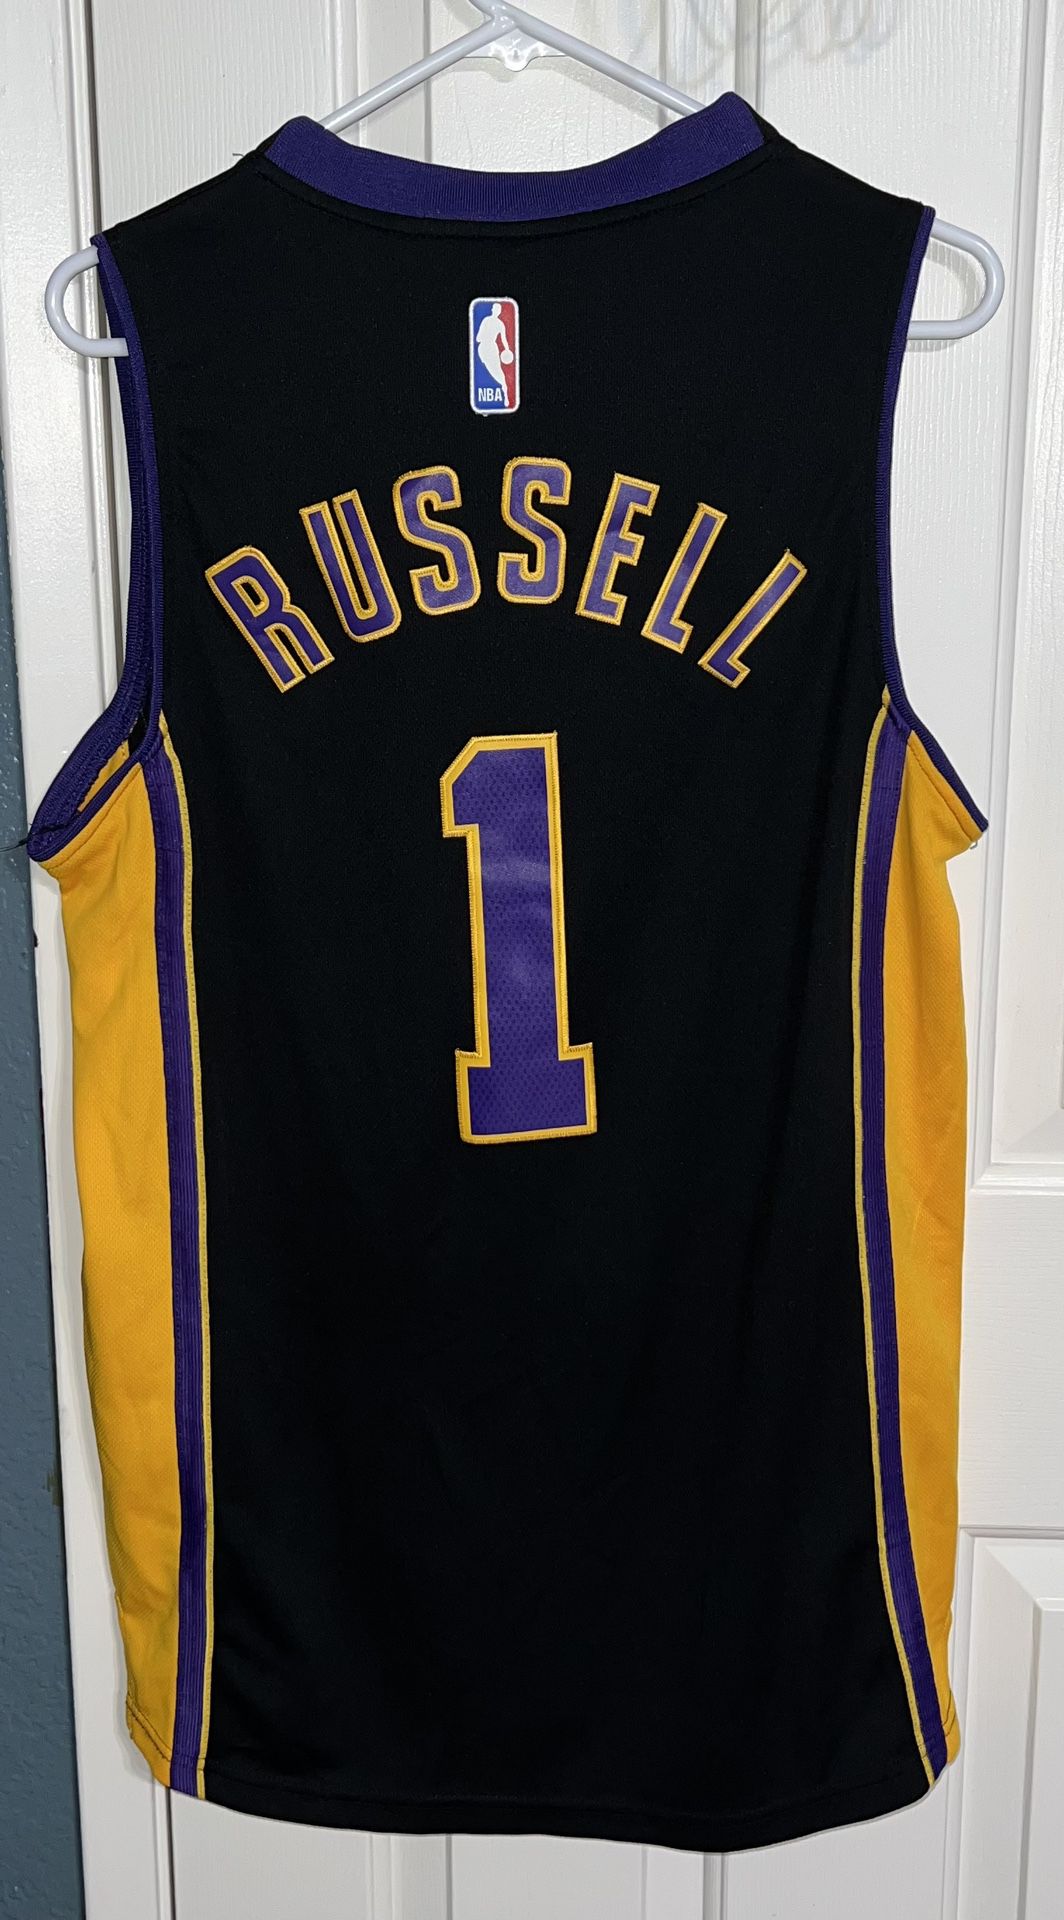 adidas D'Angelo Russell Los Angeles Lakers Revolution 30 Jersey